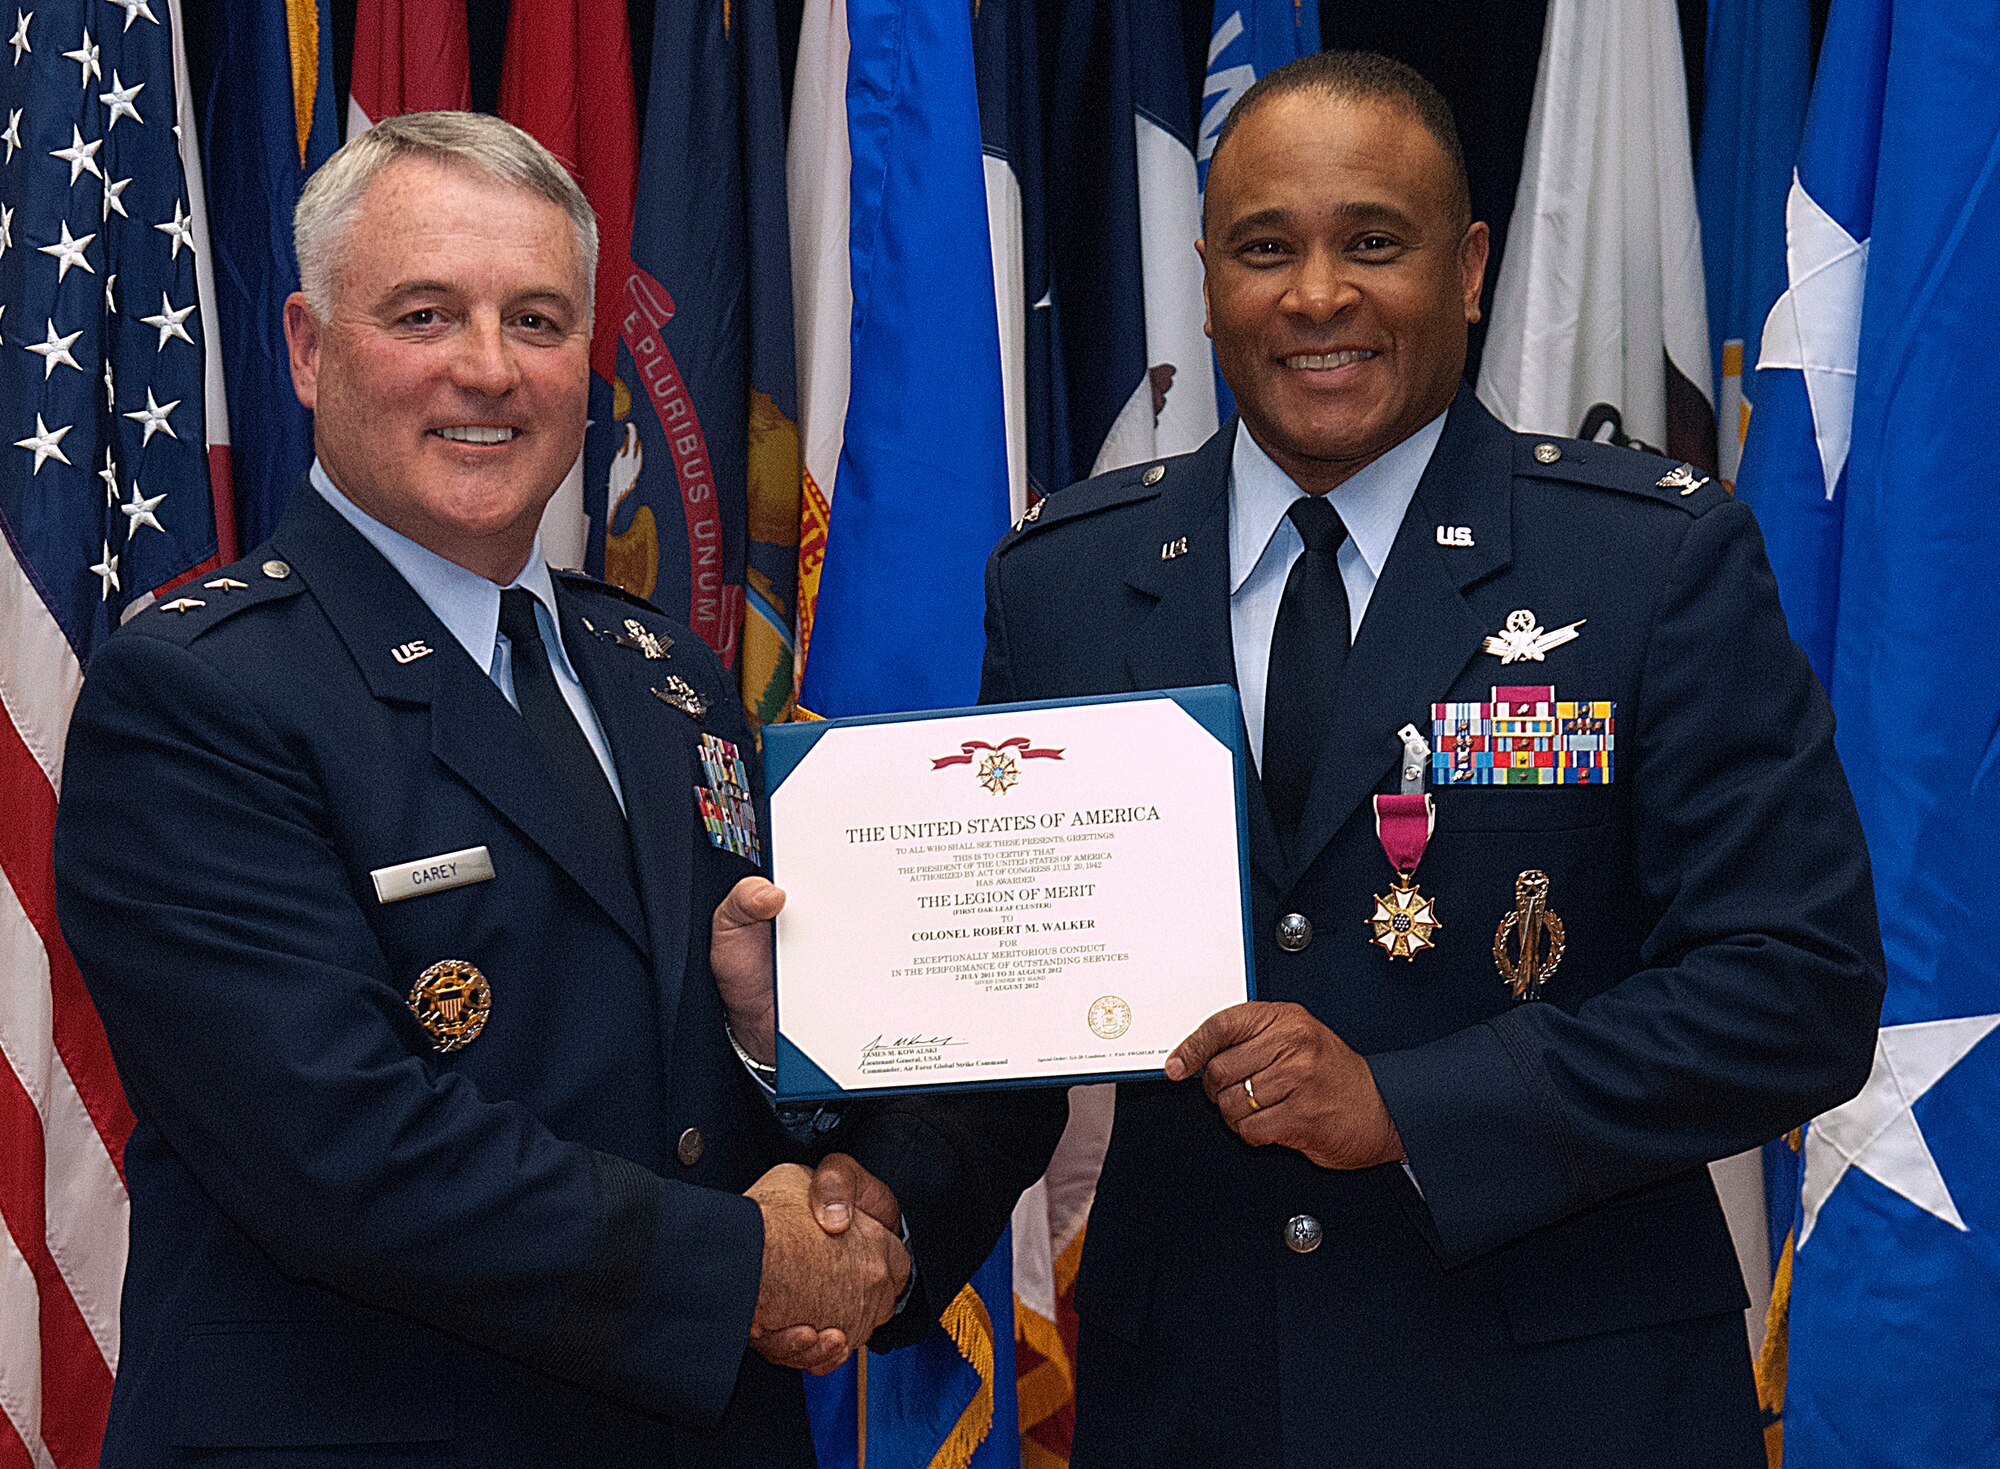 Maj. Gen. Michael J. Carey, 20th Air Force commander, and Col. Robert Walker hold Walker’s Legion of Merit citation during his retirement ceremony at the Base Museum Aug. 17. Walker retired from the United States Air Force after more than 31 years of military service. (U.S. Air Force photo by R.J. Oriez)